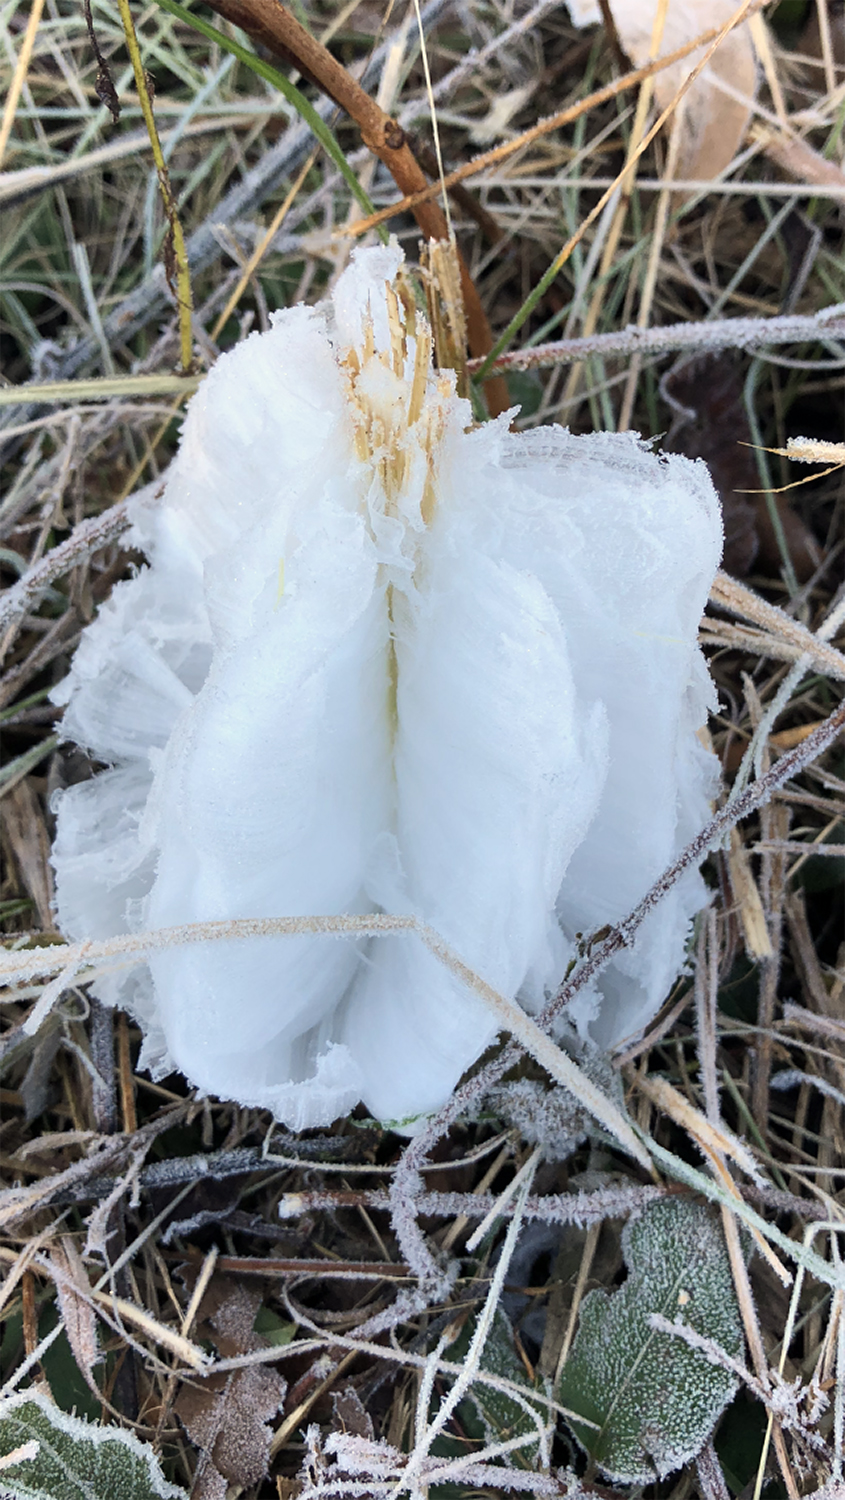 Frost flowers in Tennessee. Photograph shot on November 3, 2019. Copyright Keith Dotson.